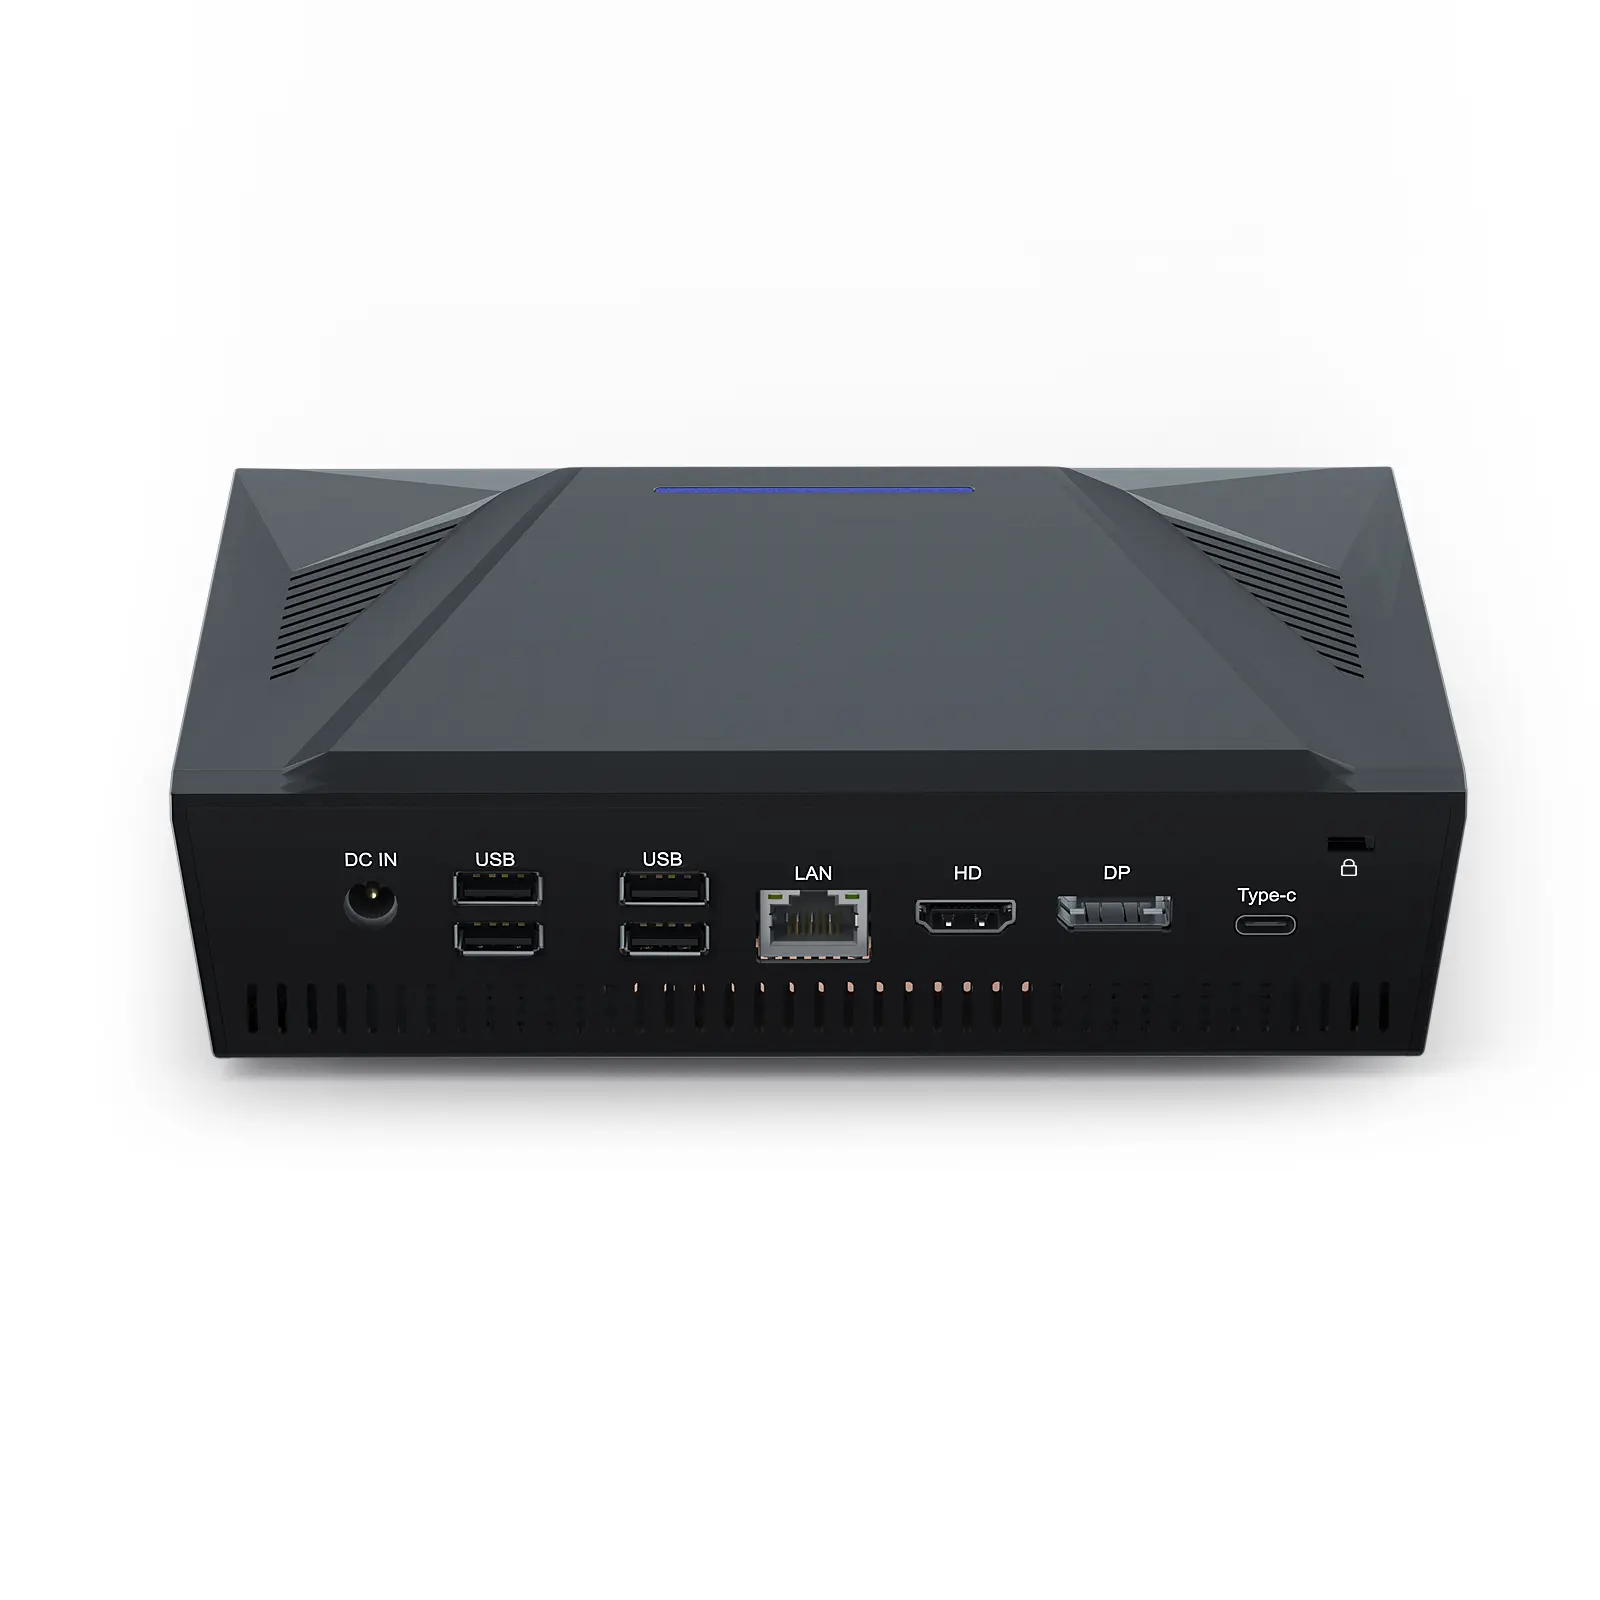 Newest T-hunderbolt Mini NUC pc with Fan 11th/12th Gen Core i5/I7 Small Dual HDMl DP Tpye-c Desktop Computer with 3*Display